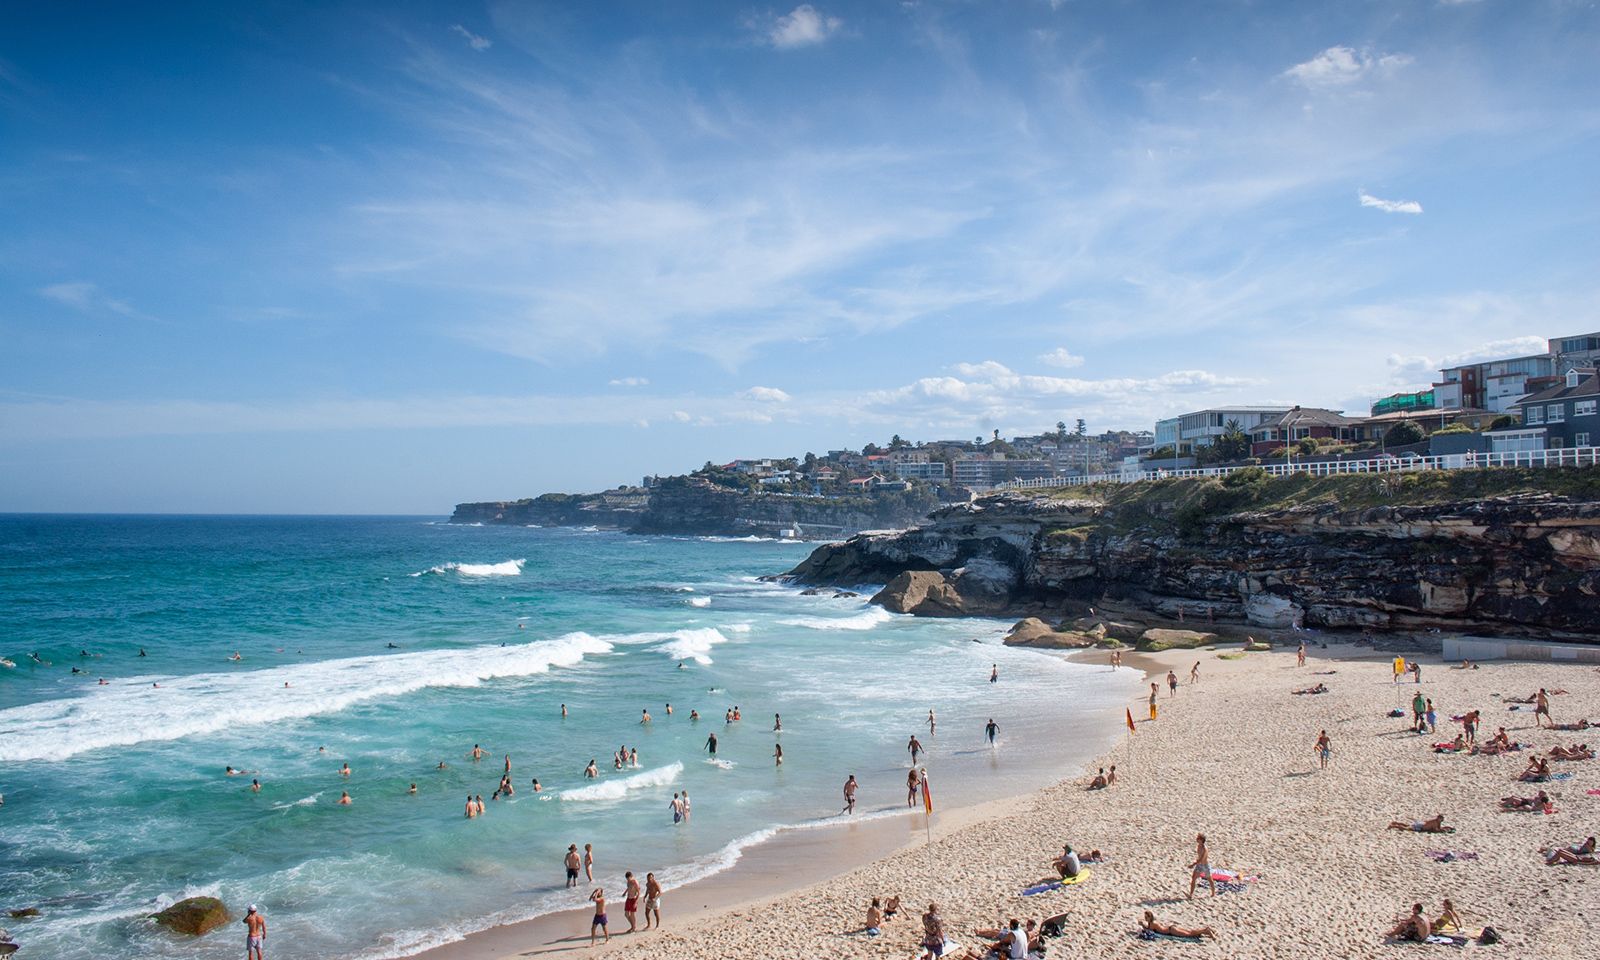 Sydney Private Guided Tours - Visit spectacular beaches all along Sydney's coastline